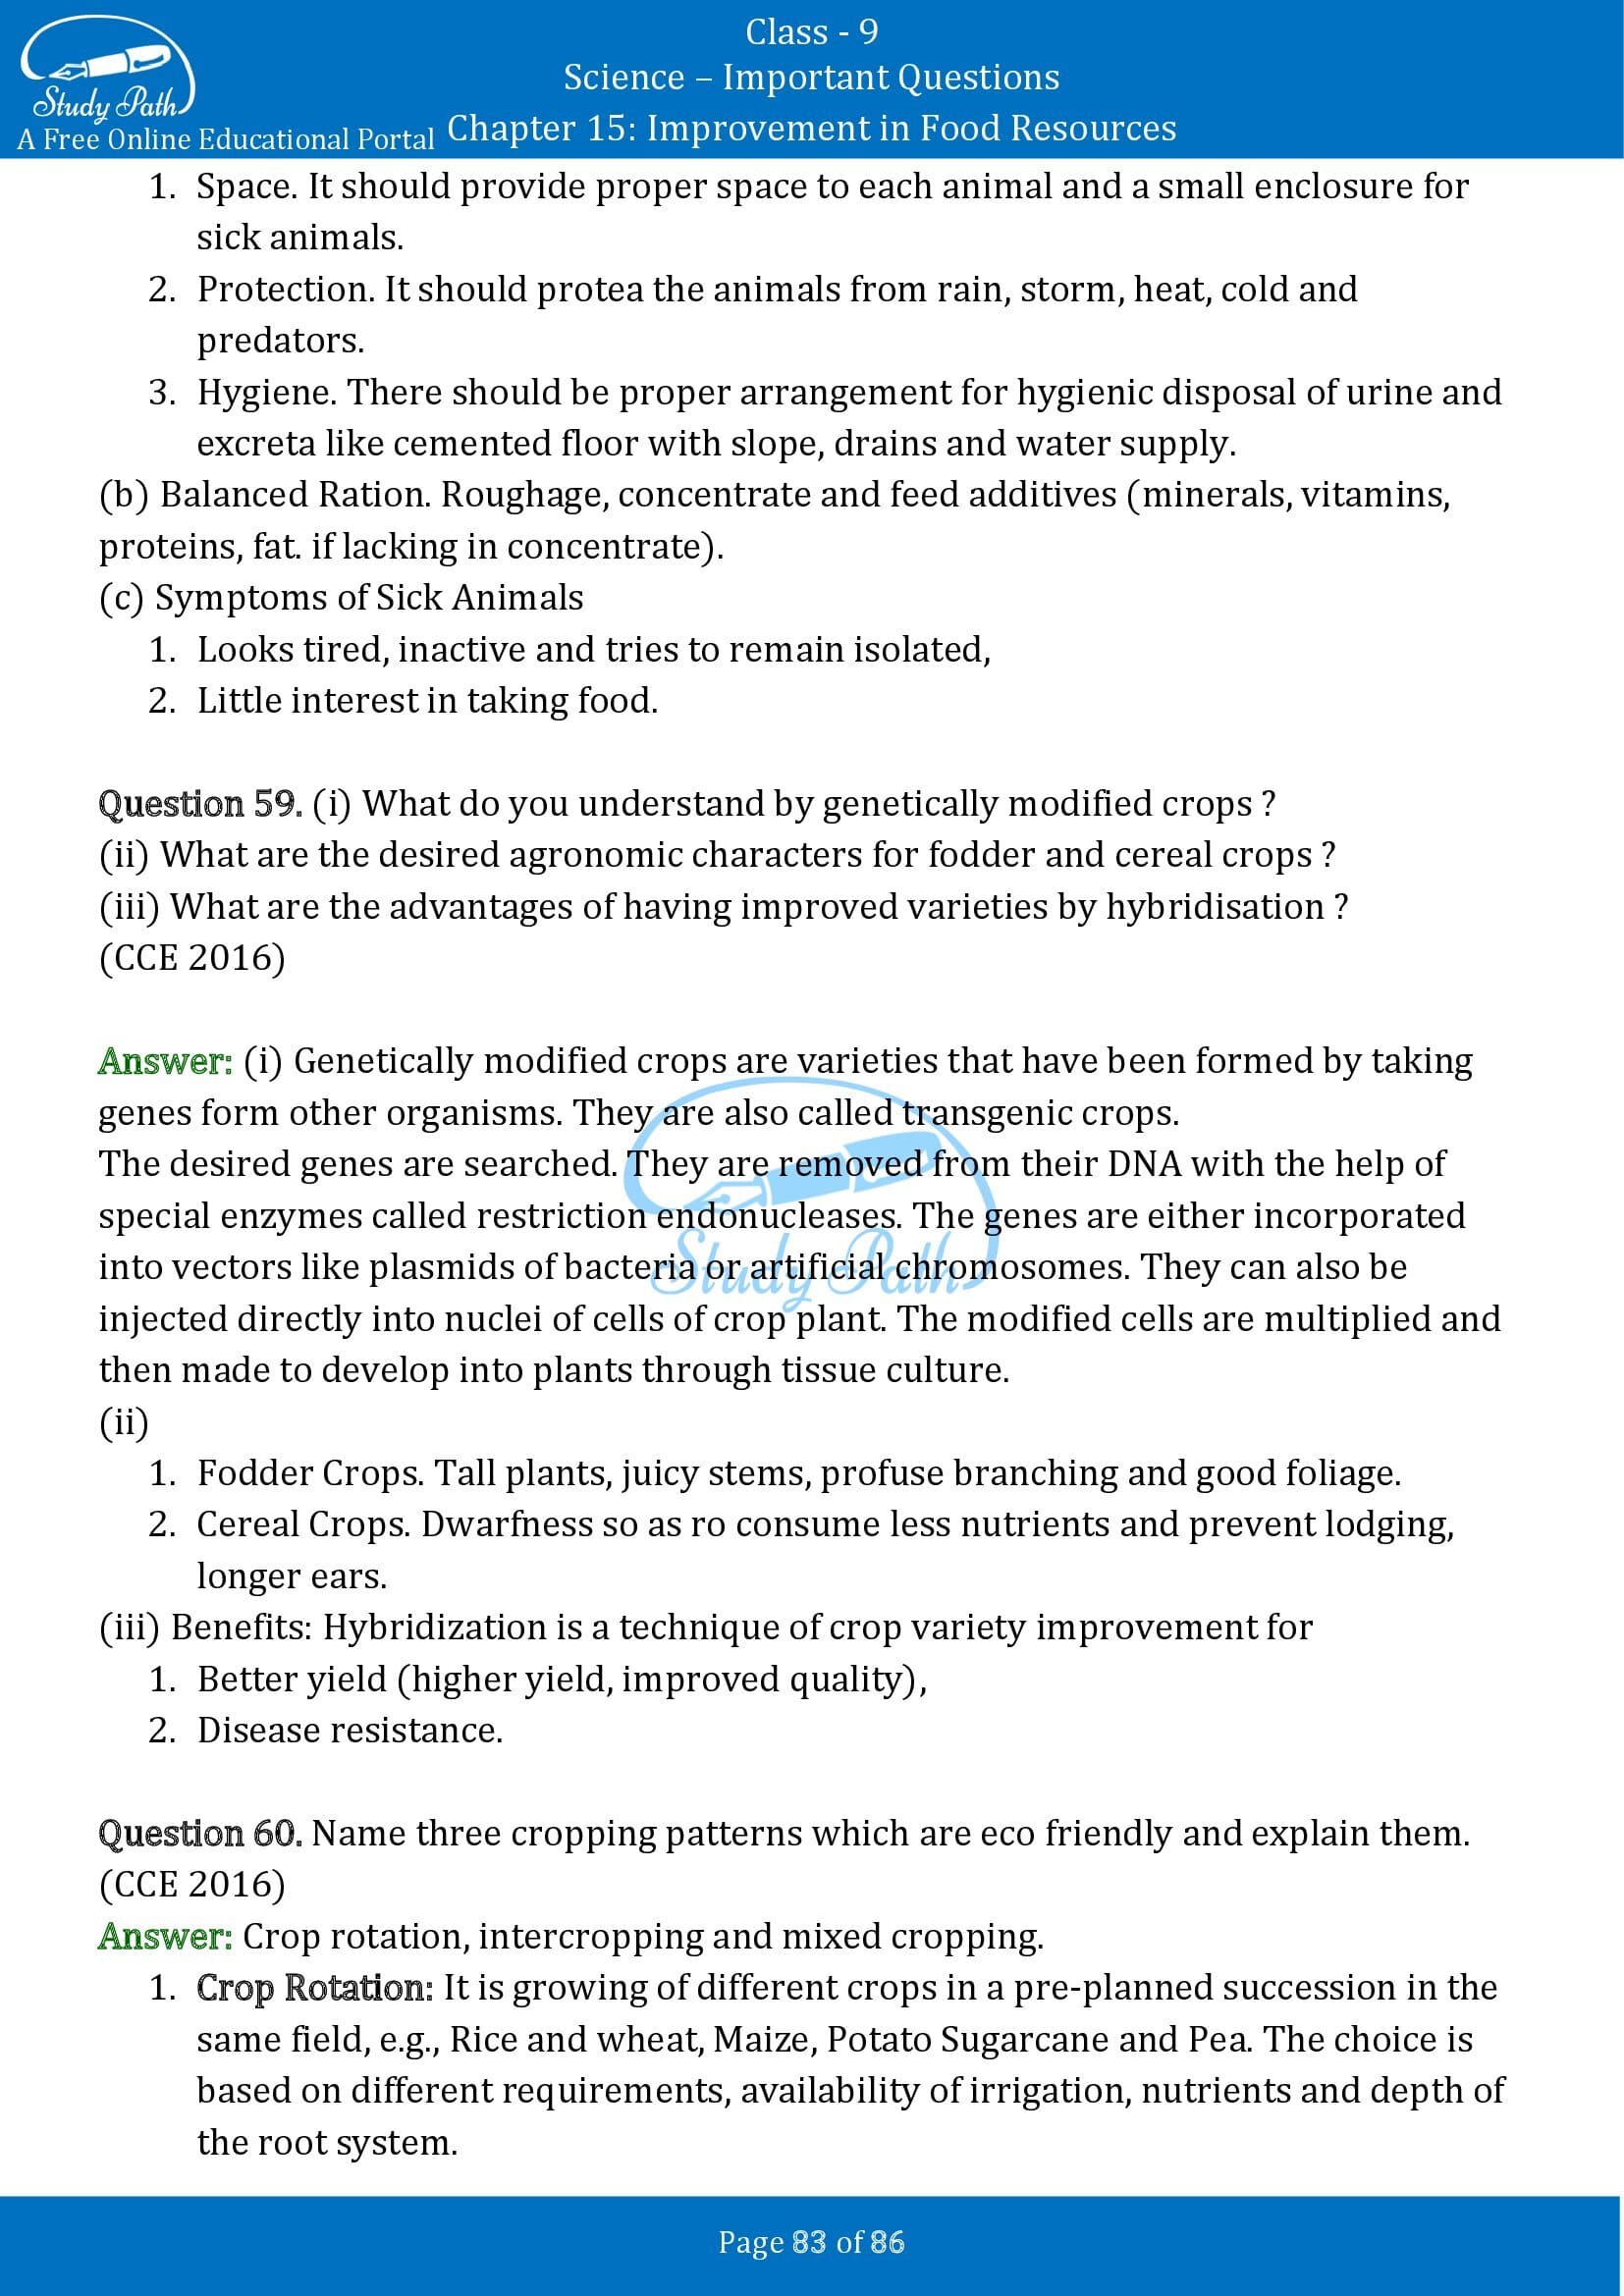 Important Questions for Class 9 Science Chapter 15 Improvement in Food Resources 00083